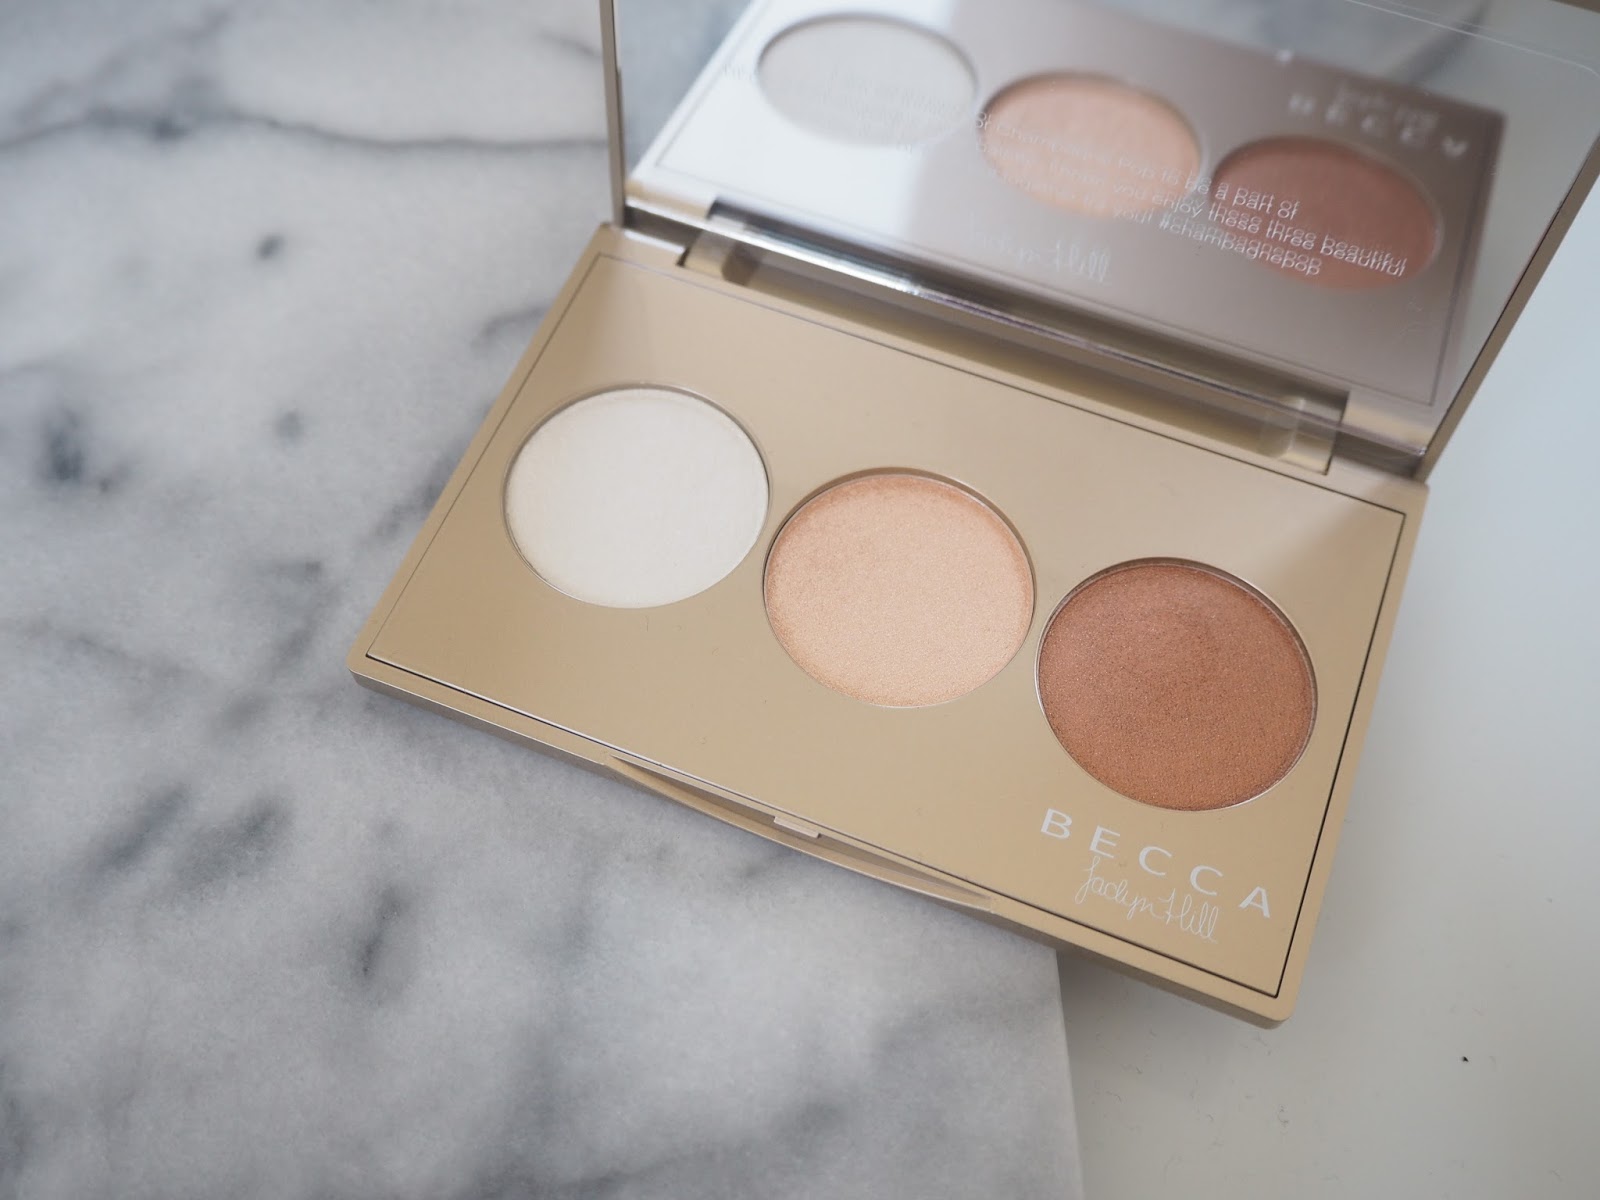 Becca Champagne Glow palette giveaway